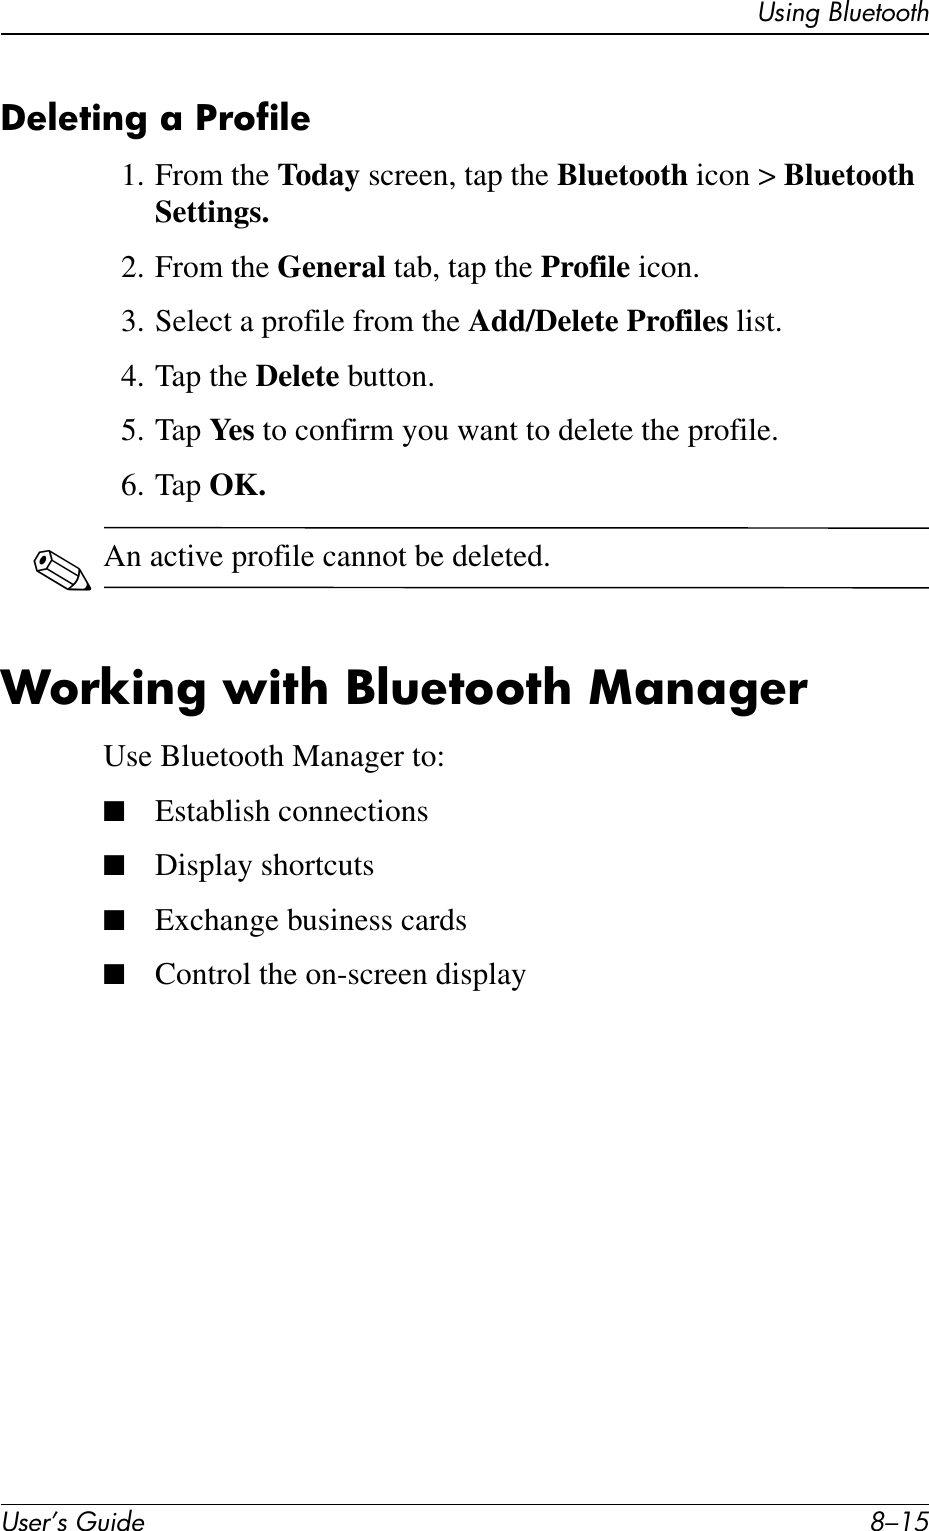 Using BluetoothUser’s Guide 8–15Deleting a Profile1. From the Today screen, tap the Bluetooth icon &gt; Bluetooth Settings.2. From the General tab, tap the Profile icon.3. Select a profile from the Add/Delete Profiles list.4. Tap the Delete button.5. Tap Ye s  to confirm you want to delete the profile.6. Tap OK.✎An active profile cannot be deleted.Working with Bluetooth ManagerUse Bluetooth Manager to:■Establish connections■Display shortcuts■Exchange business cards■Control the on-screen display